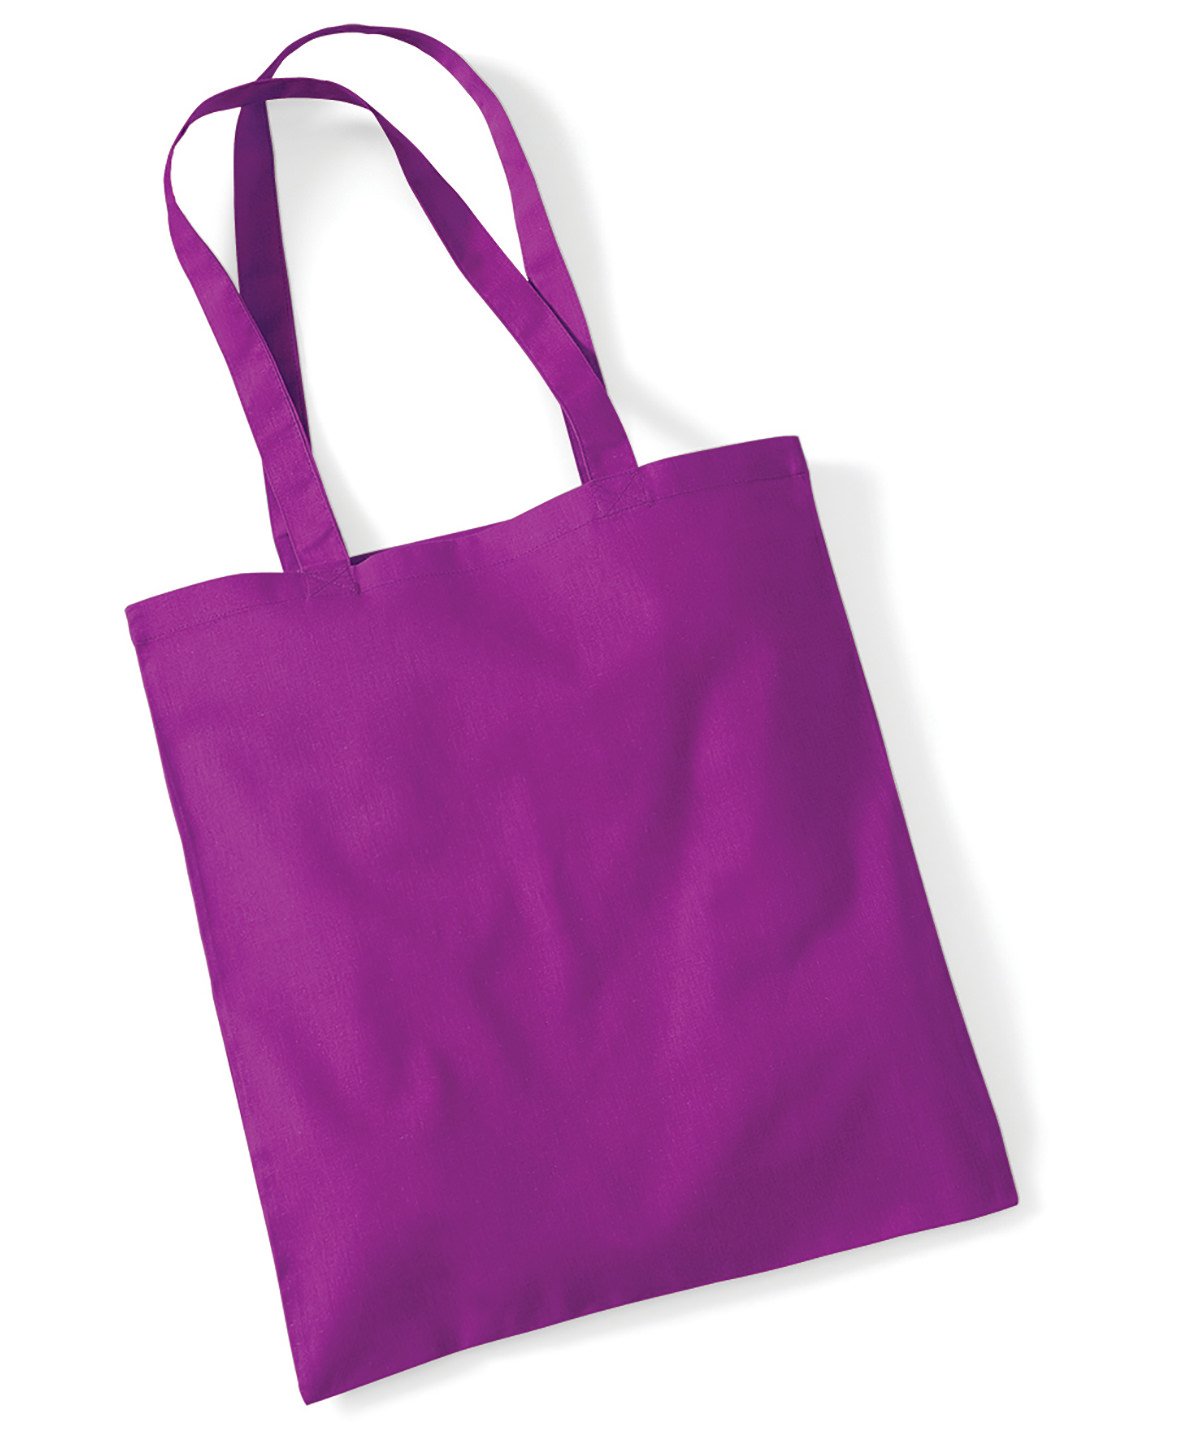 Long Handle Tote bag with Printed Quotes